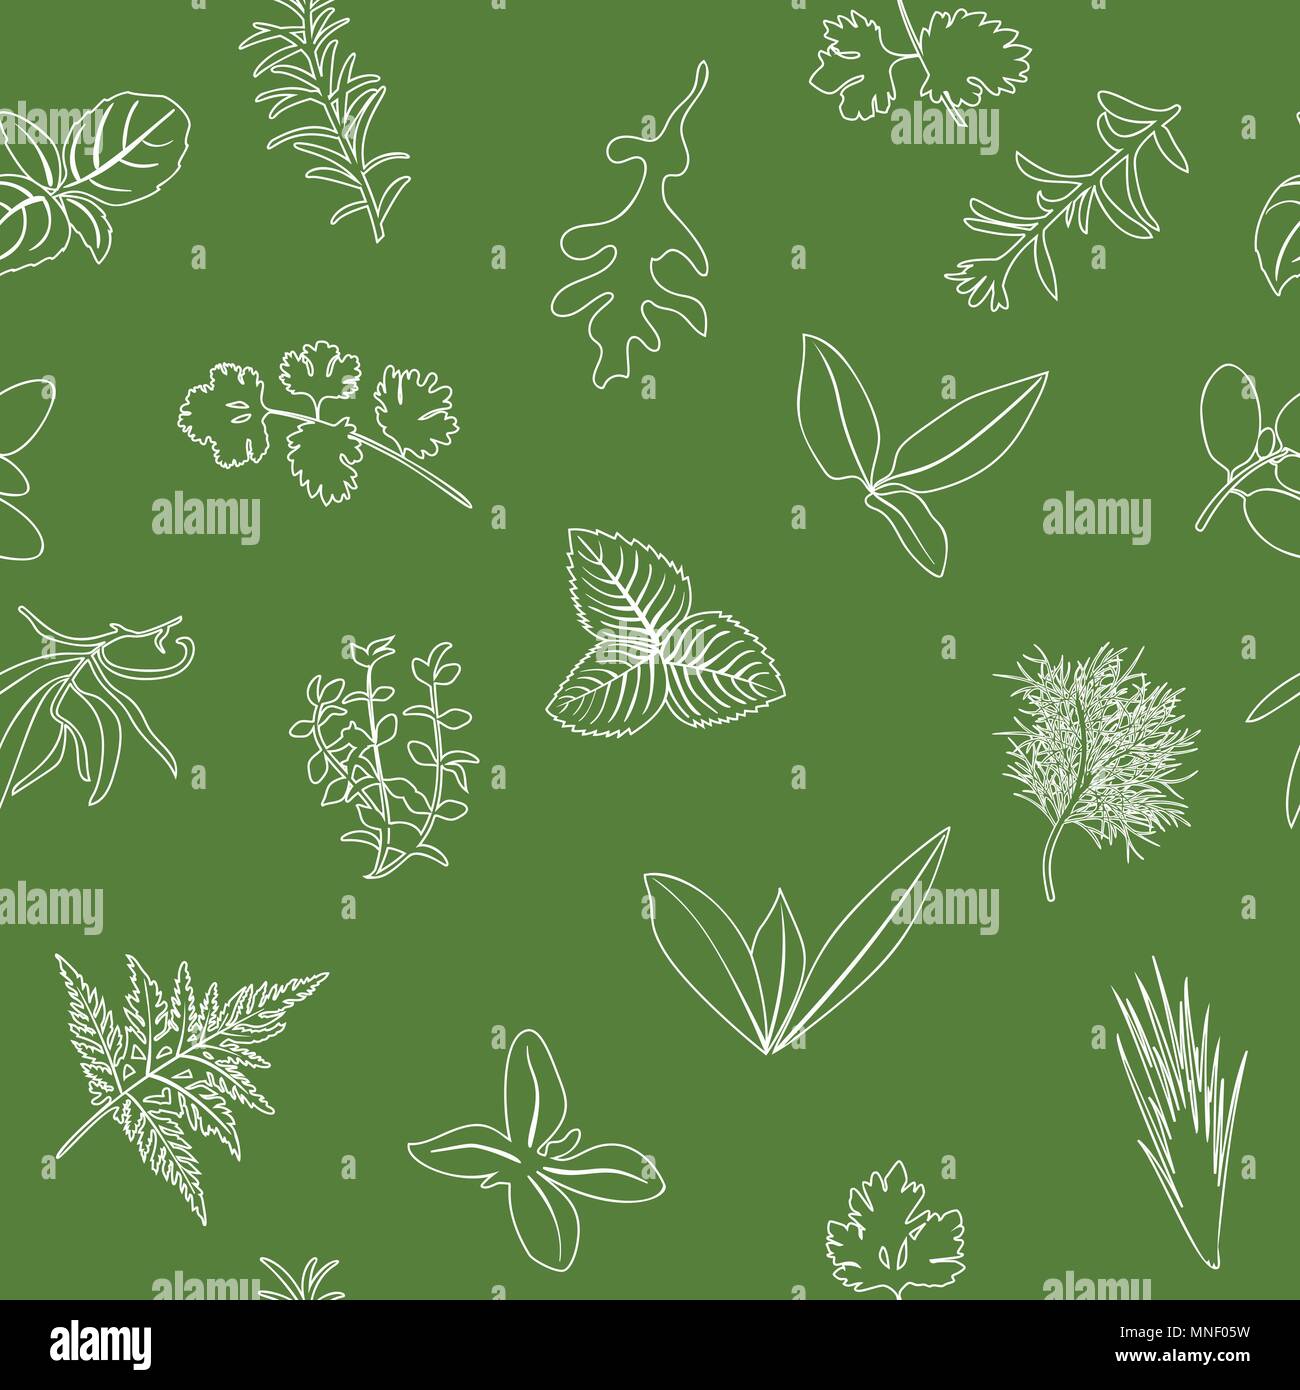 Popular culinary herbs seamless pattern. realistic style. icon outline sketch on green. Basil, coriander, mint, rosemary, basil, Stock Vector